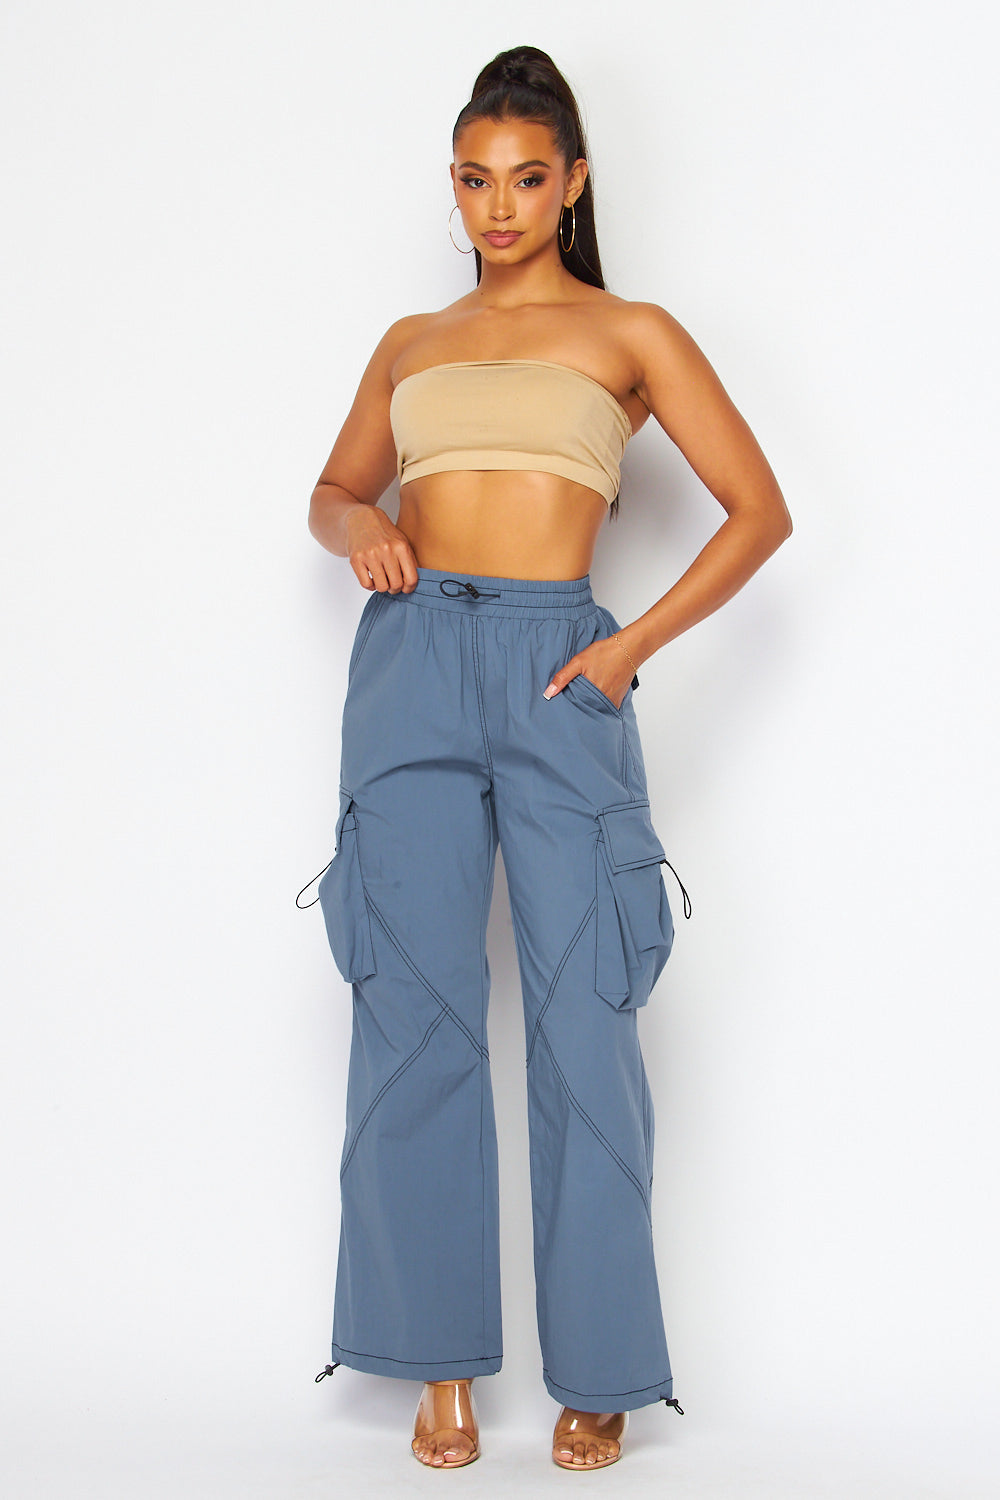 Lacey Contrast Stitch Relaxed Leg Cargo Pants